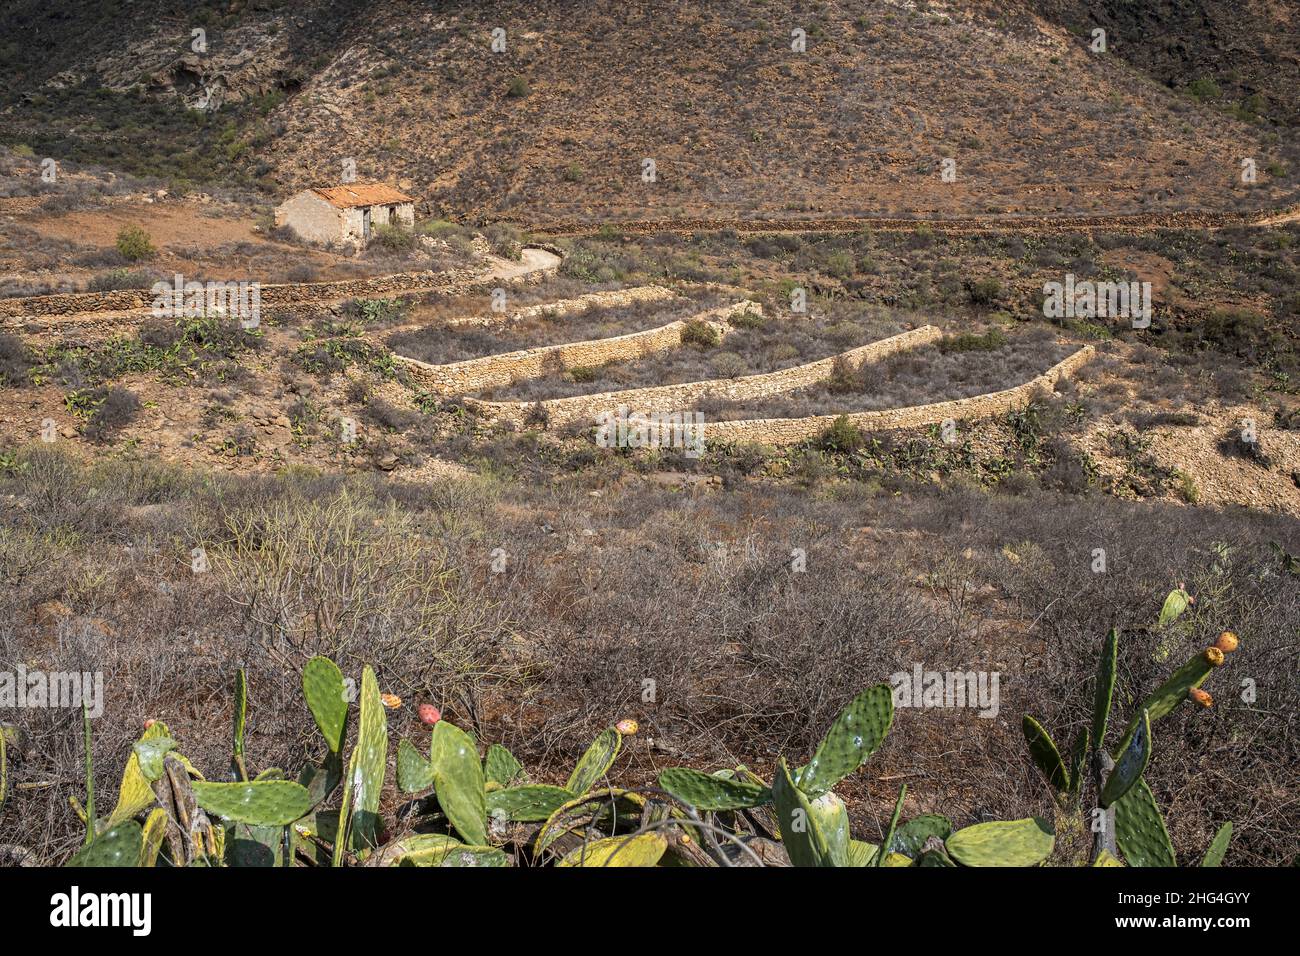 Abandoned derelict old farmhouse, finca and terraced land in San Miguel de Abona, Tenerife, Canary Islands, Spain Stock Photo